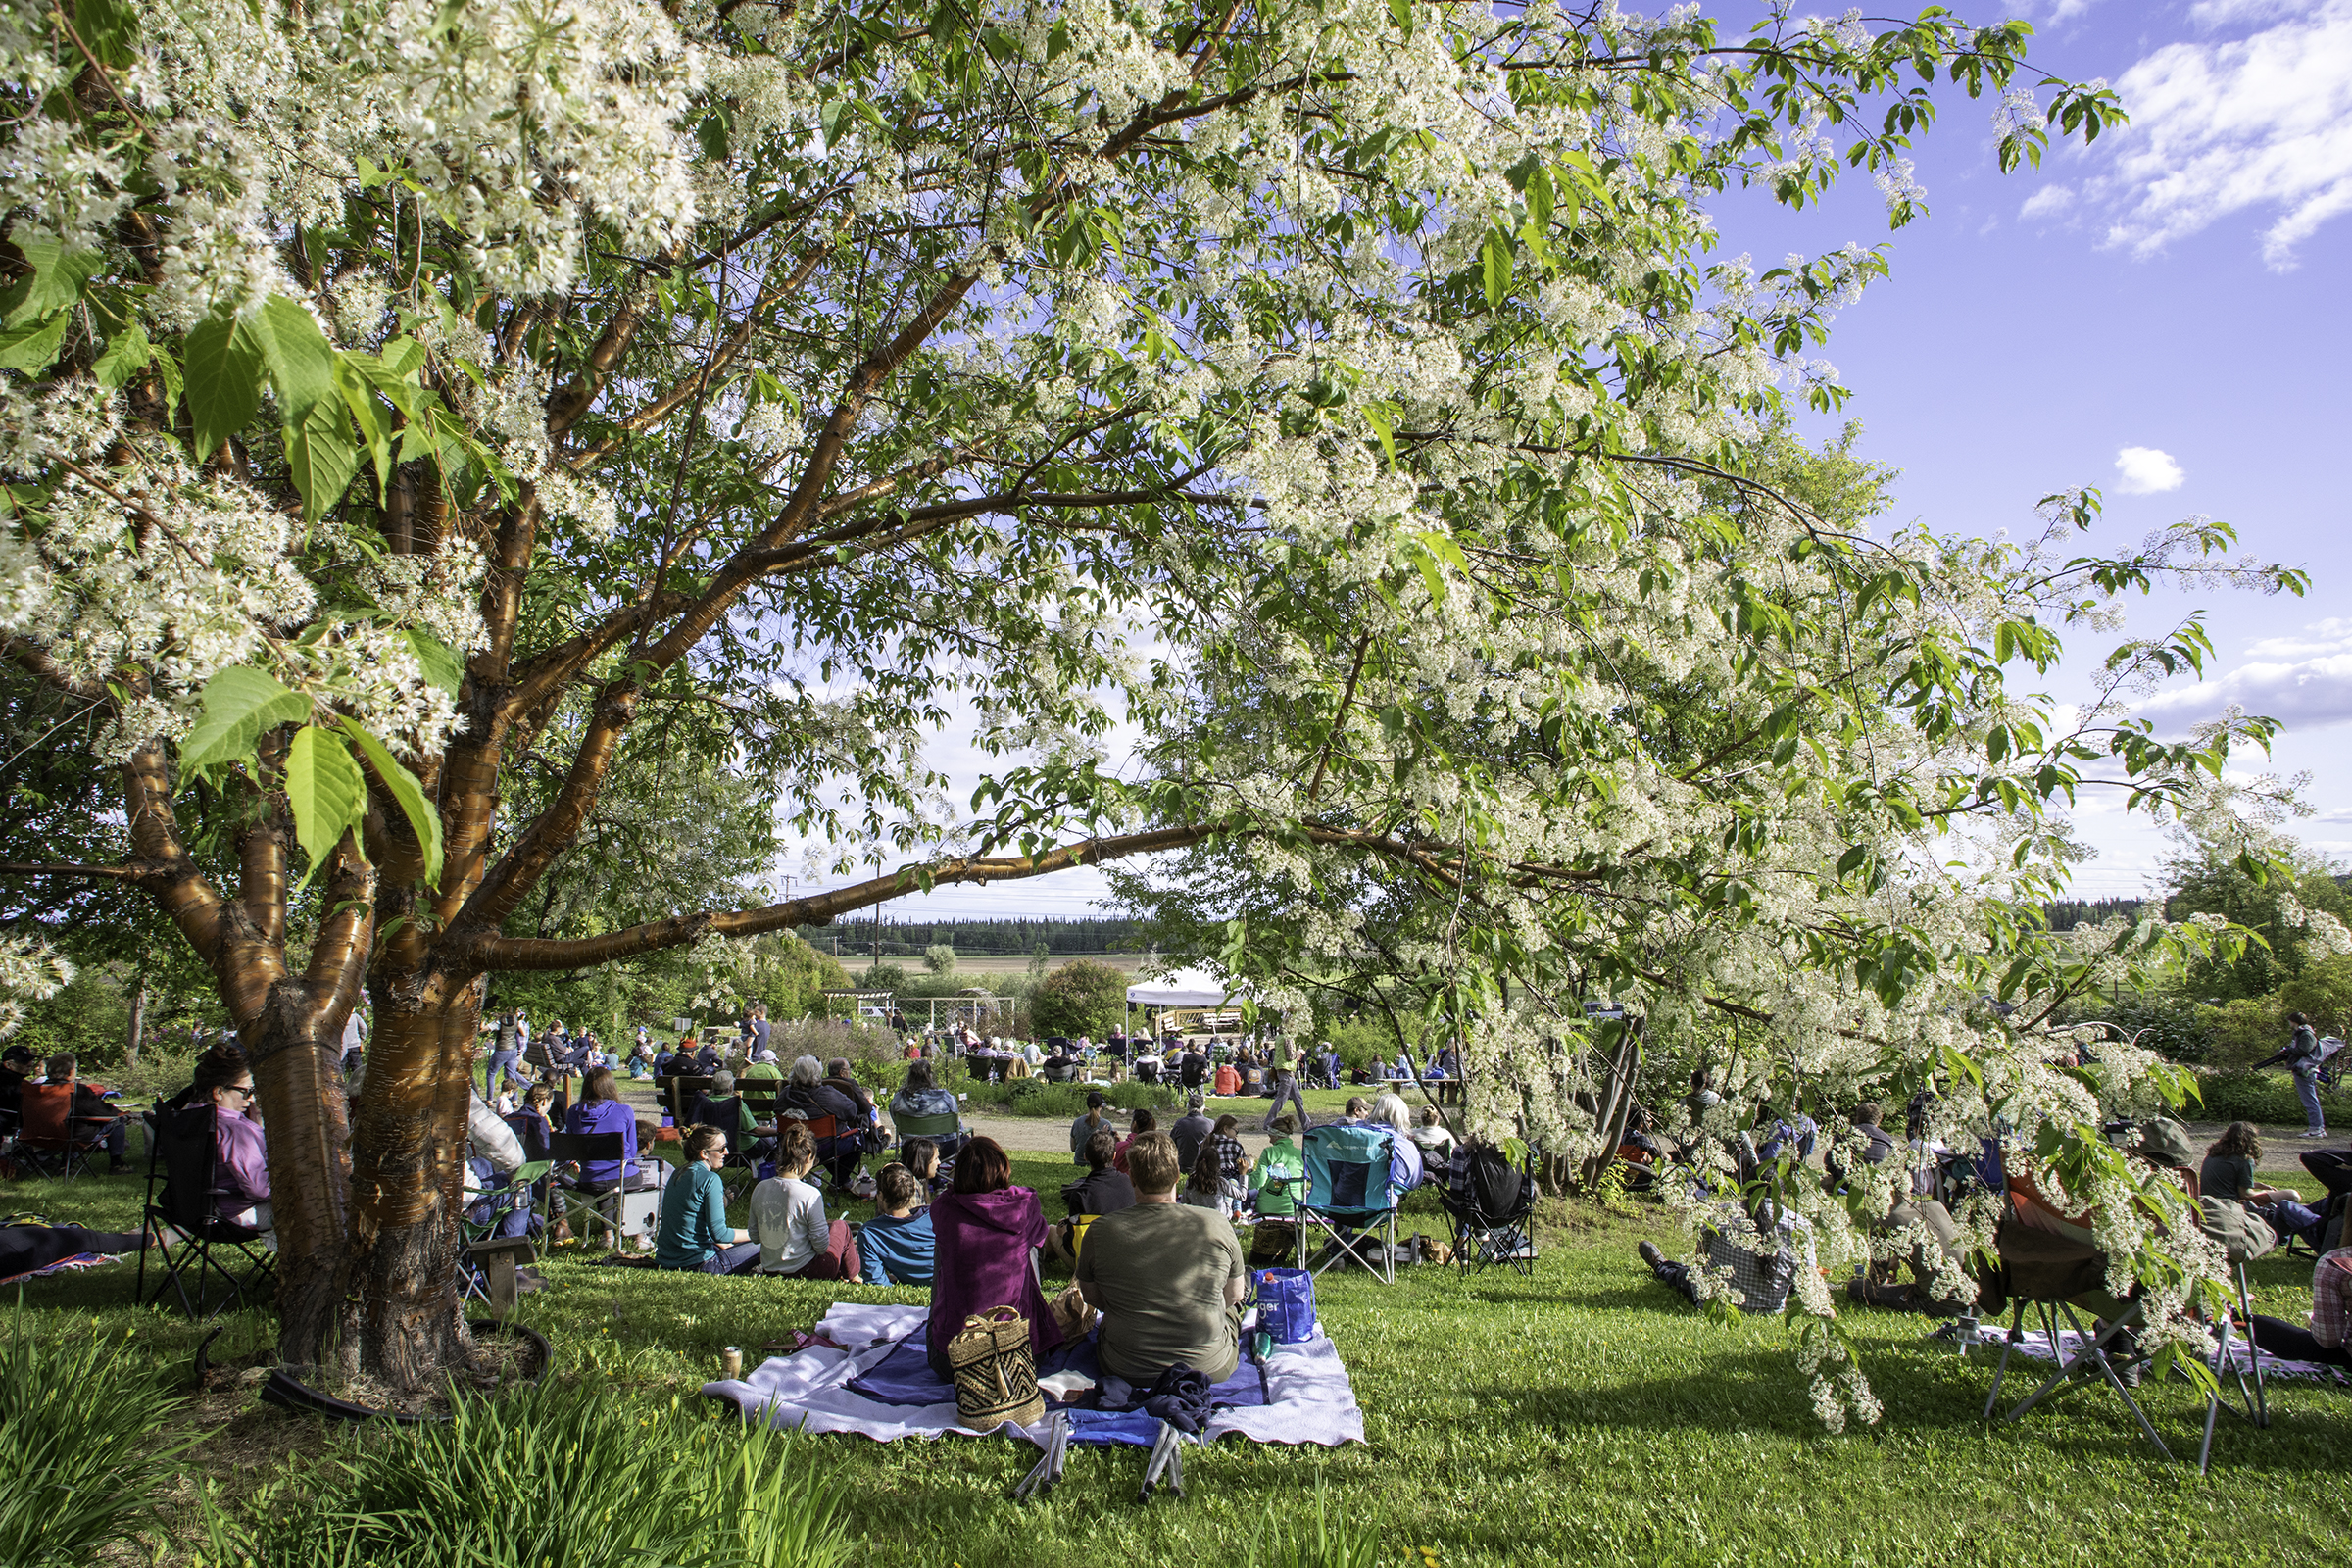 A crowd of concert-goers is seated outside in a garden on picnic blankets and lawn chairs under a flowering tree. 